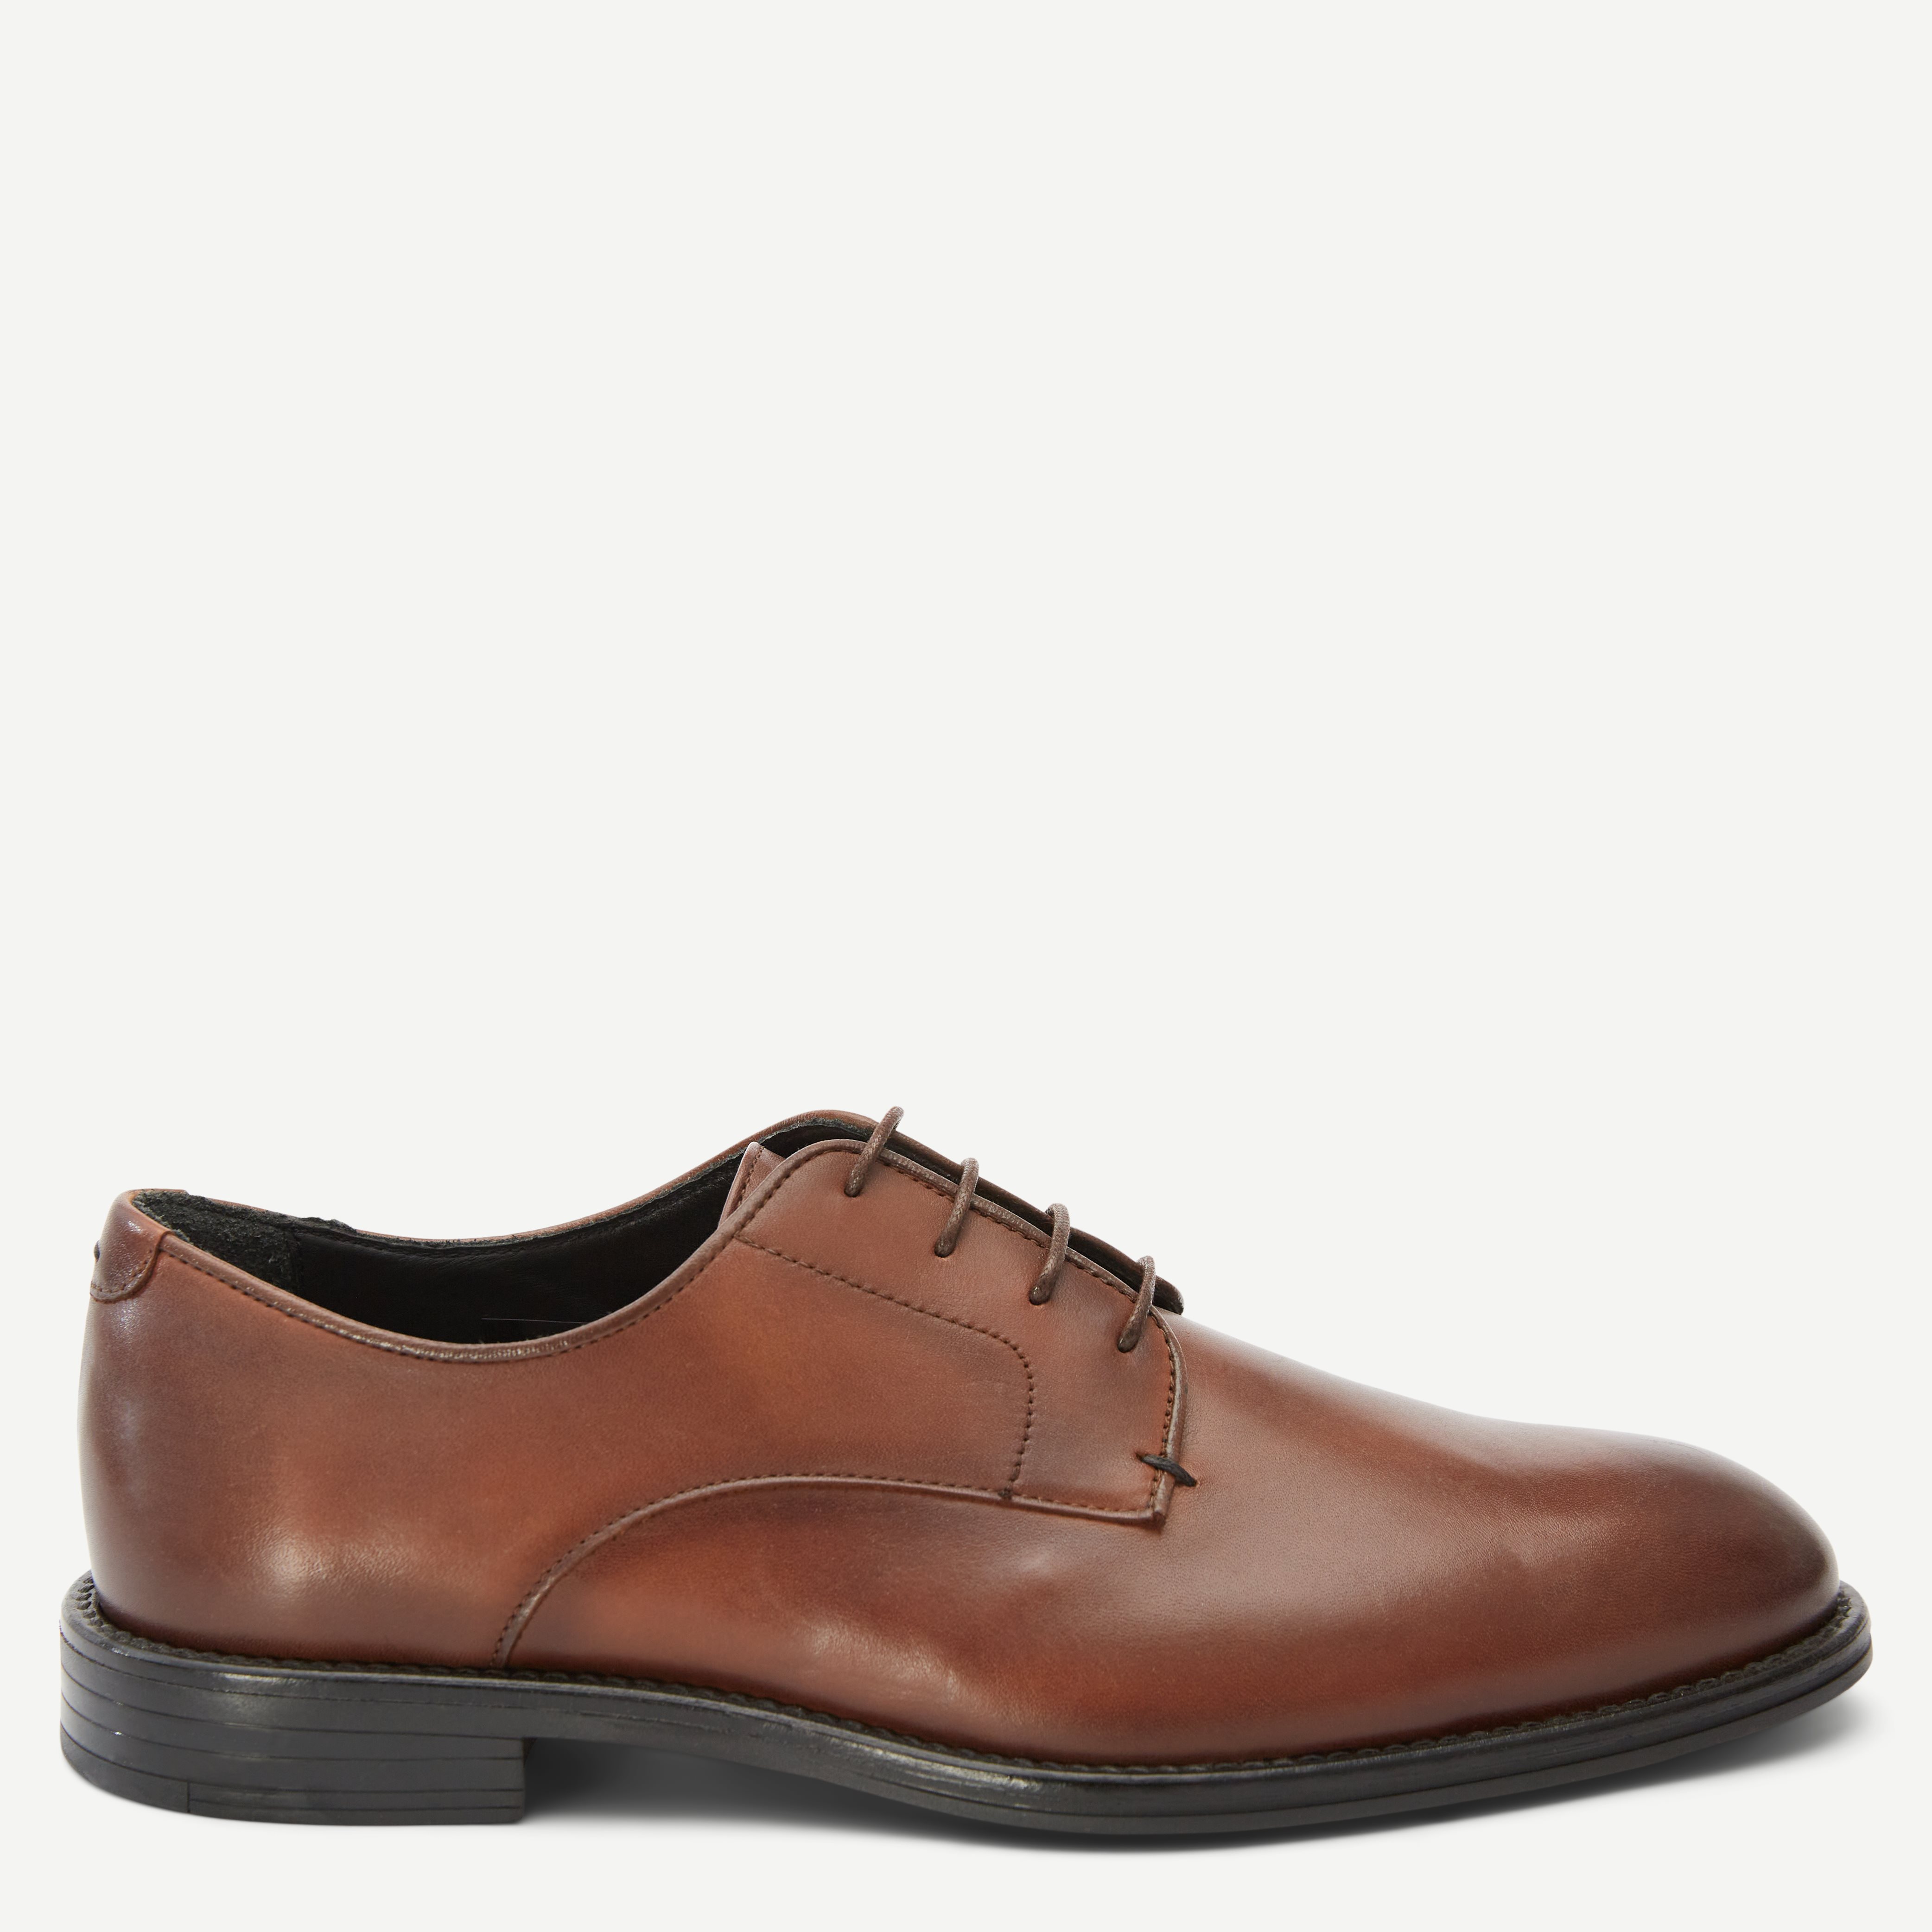 Trained Leather Shoes - Shoes - Brown